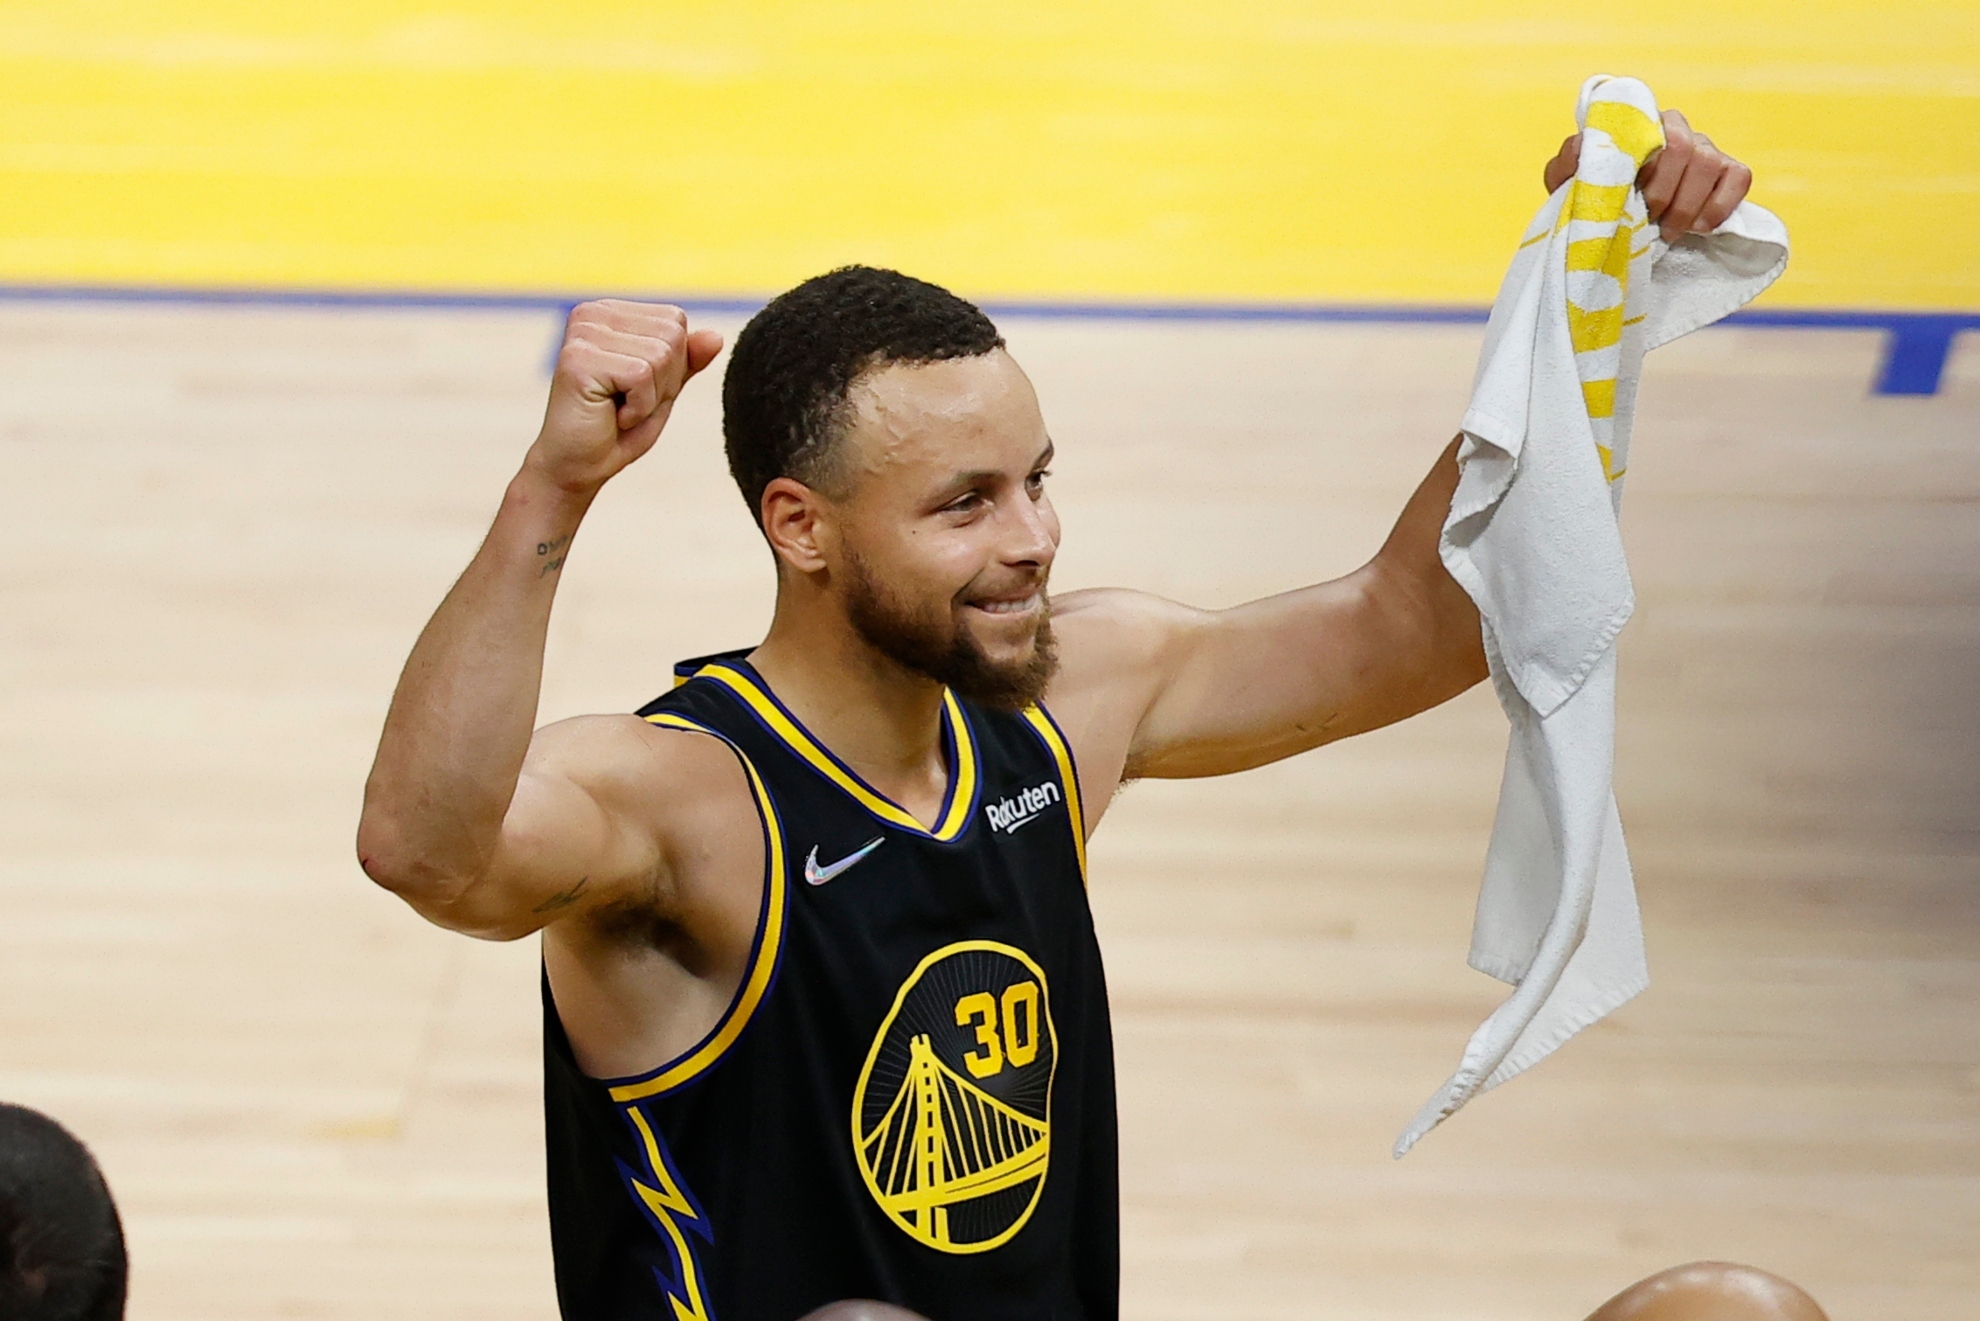 A look back on the Golden State Warriors 2015 NBA Championship run